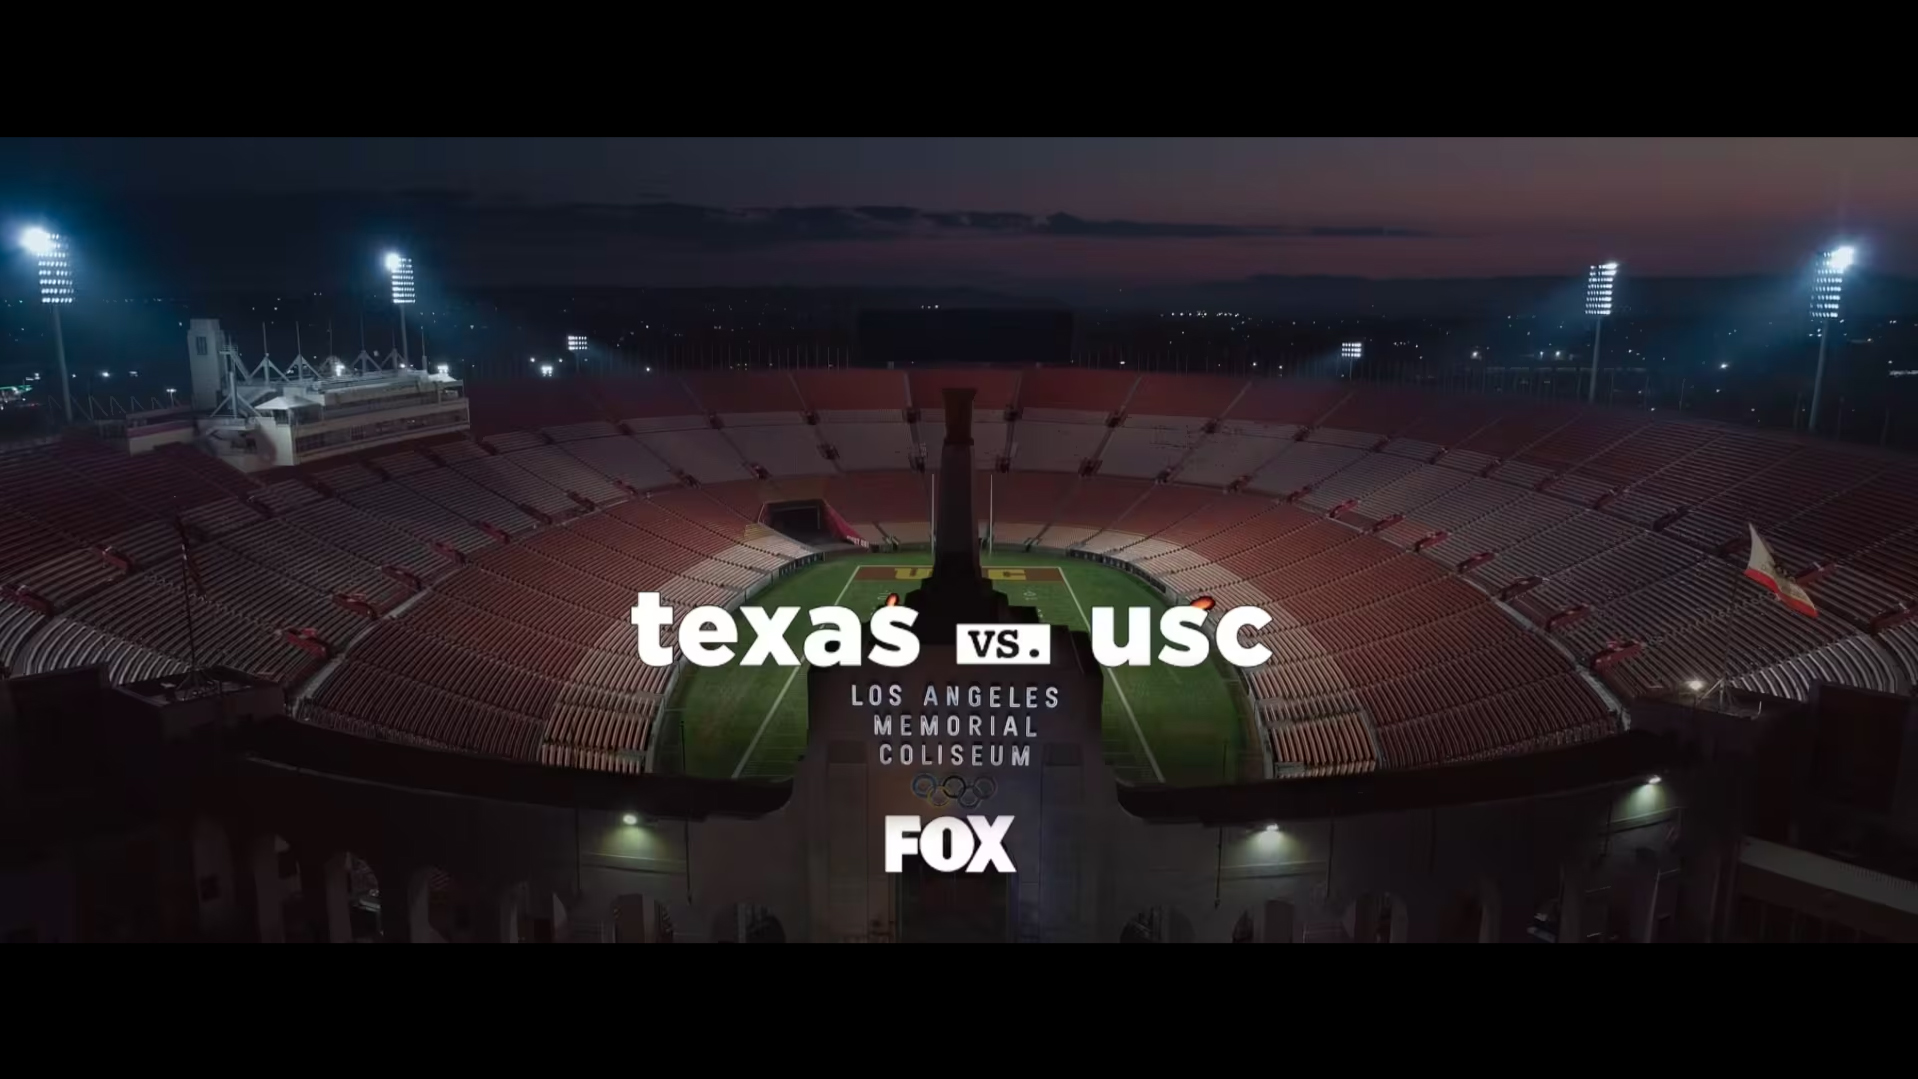 Commercial promotion for Fox Sports featuring the USC vs. Texas matchup.